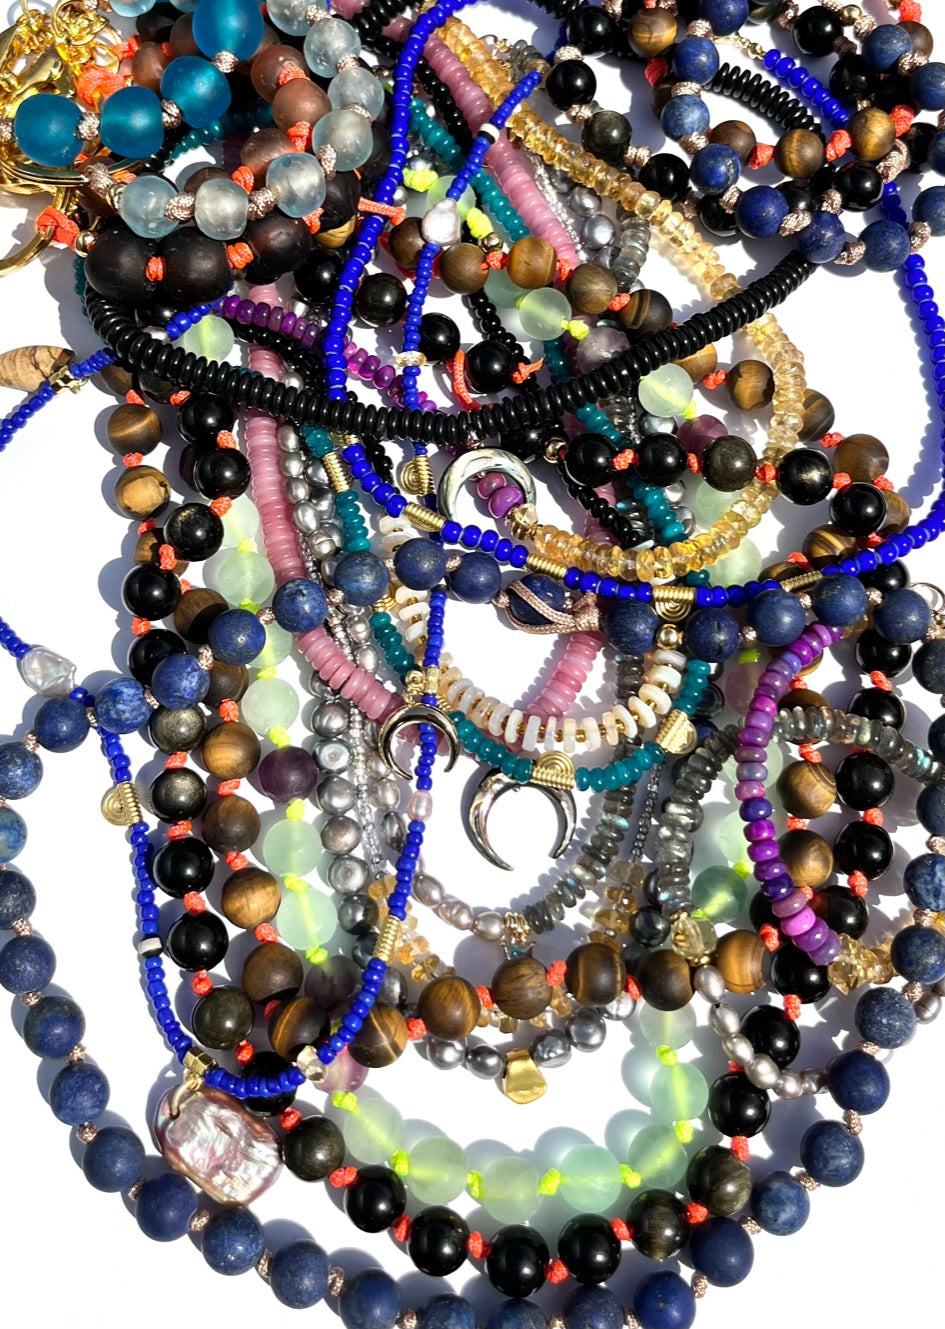 Fall Forward Knotted Necklaces